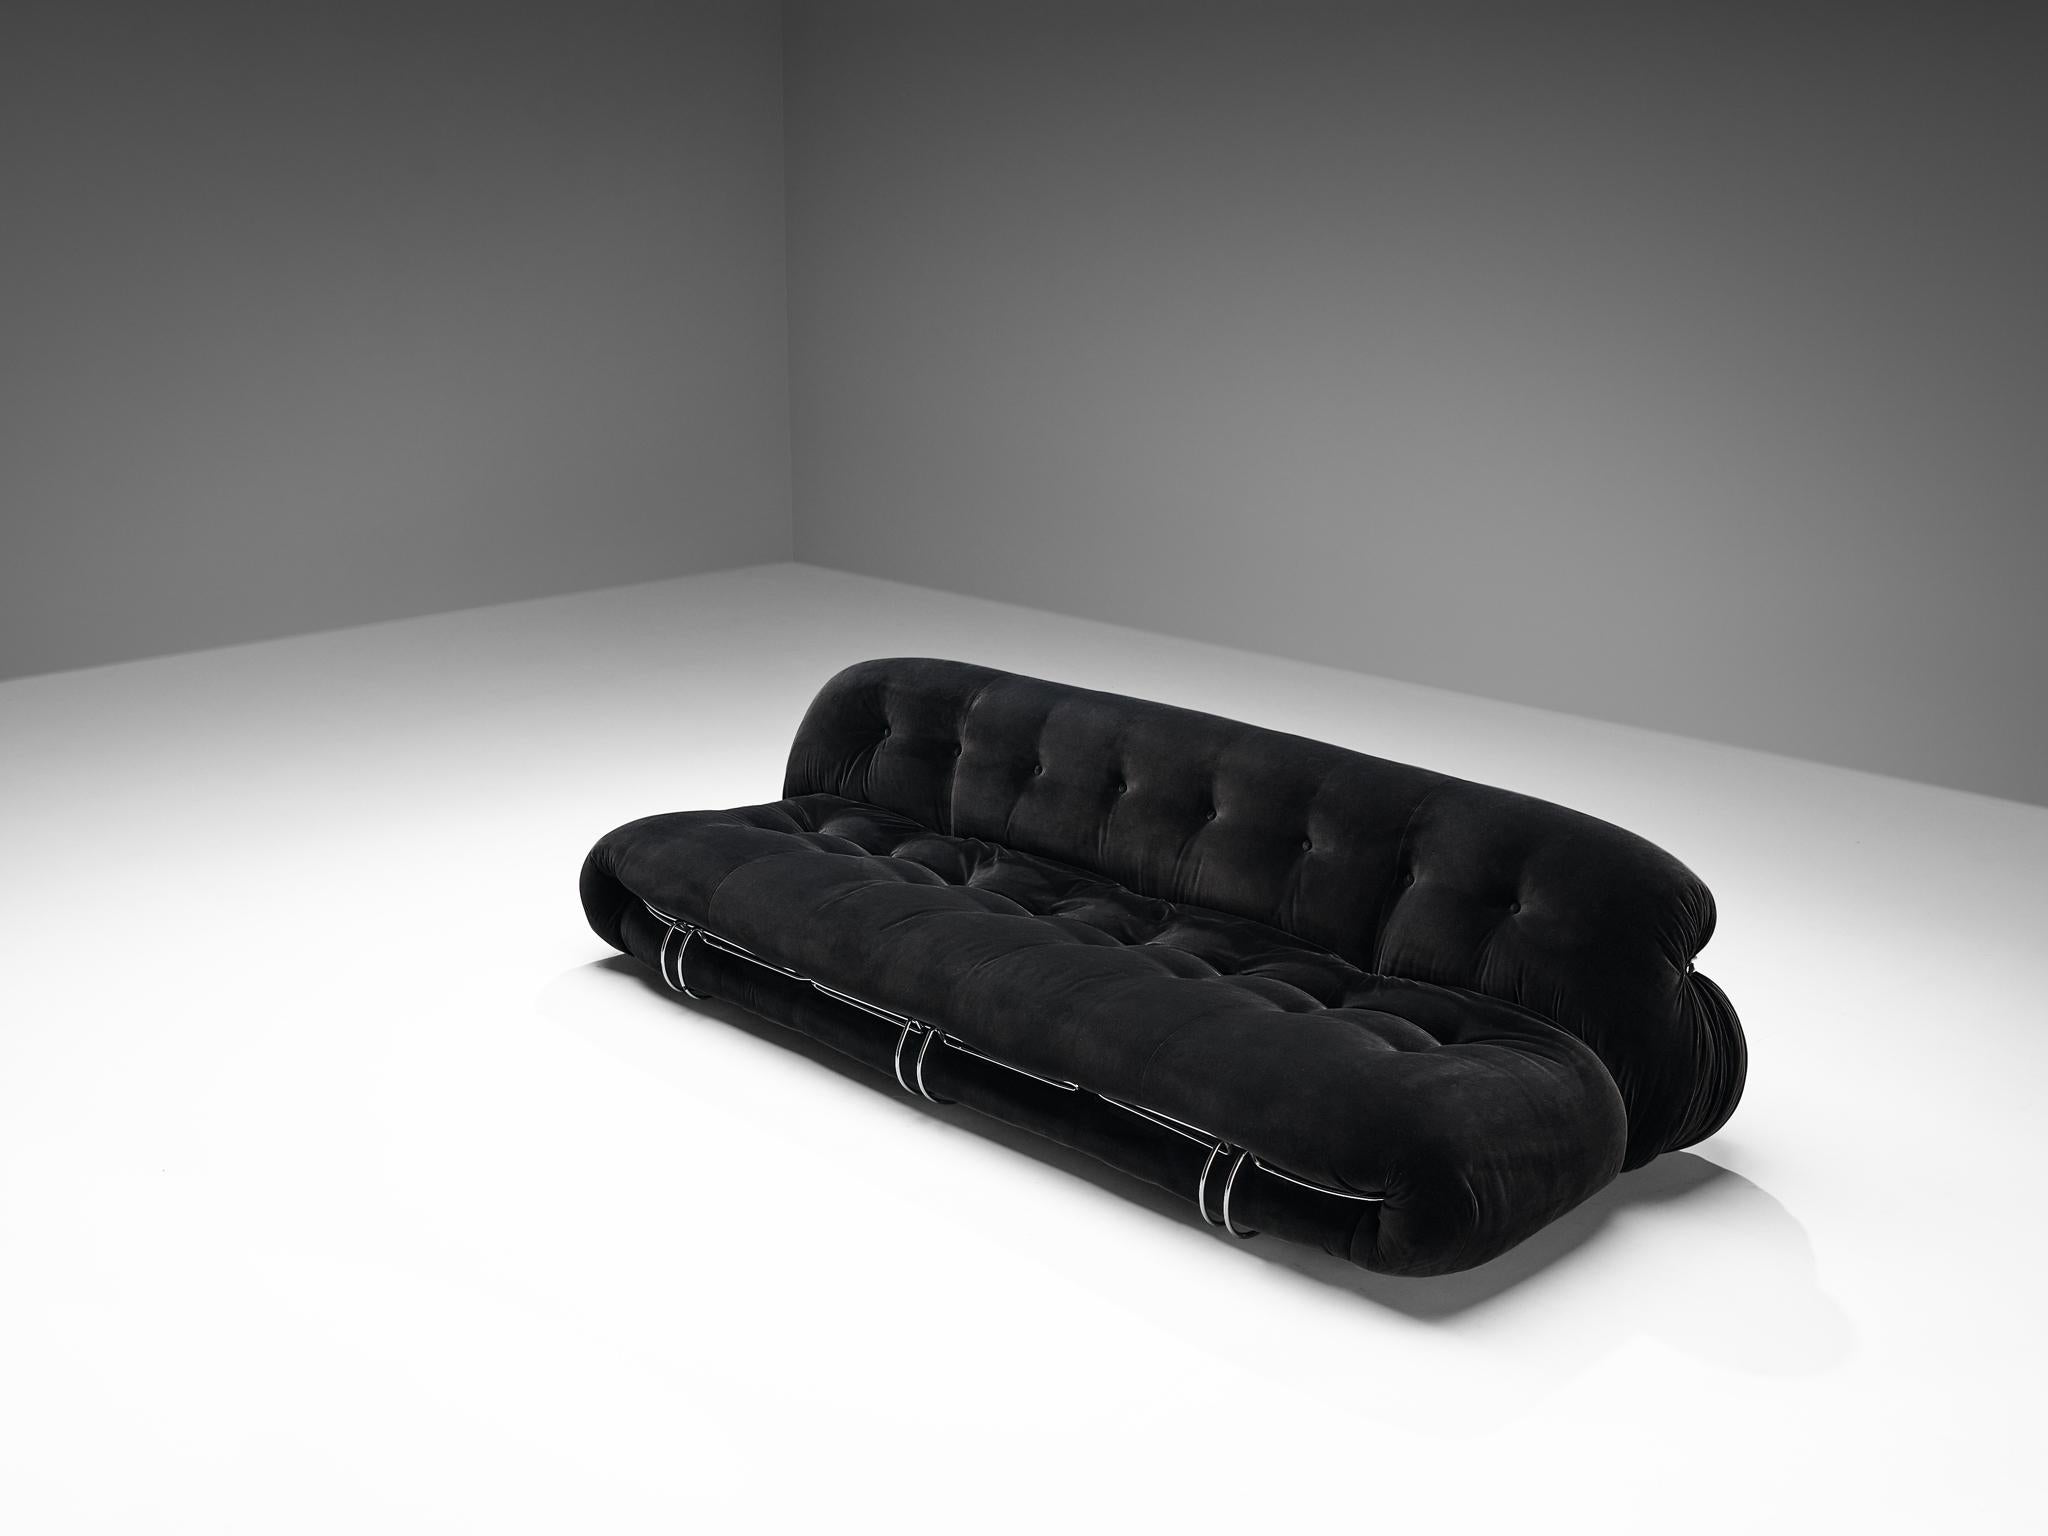 Afra & Tobia Scarpa for Cassina, 'Soriana' sofa, black velvet, chrome-plated steel, Italy, 1969

Iconic sofa by Italian designer couple Afra & Tobia Scarpa. The ‘Soriana’ proposes a model that institutionalizes the image of the informal sitting